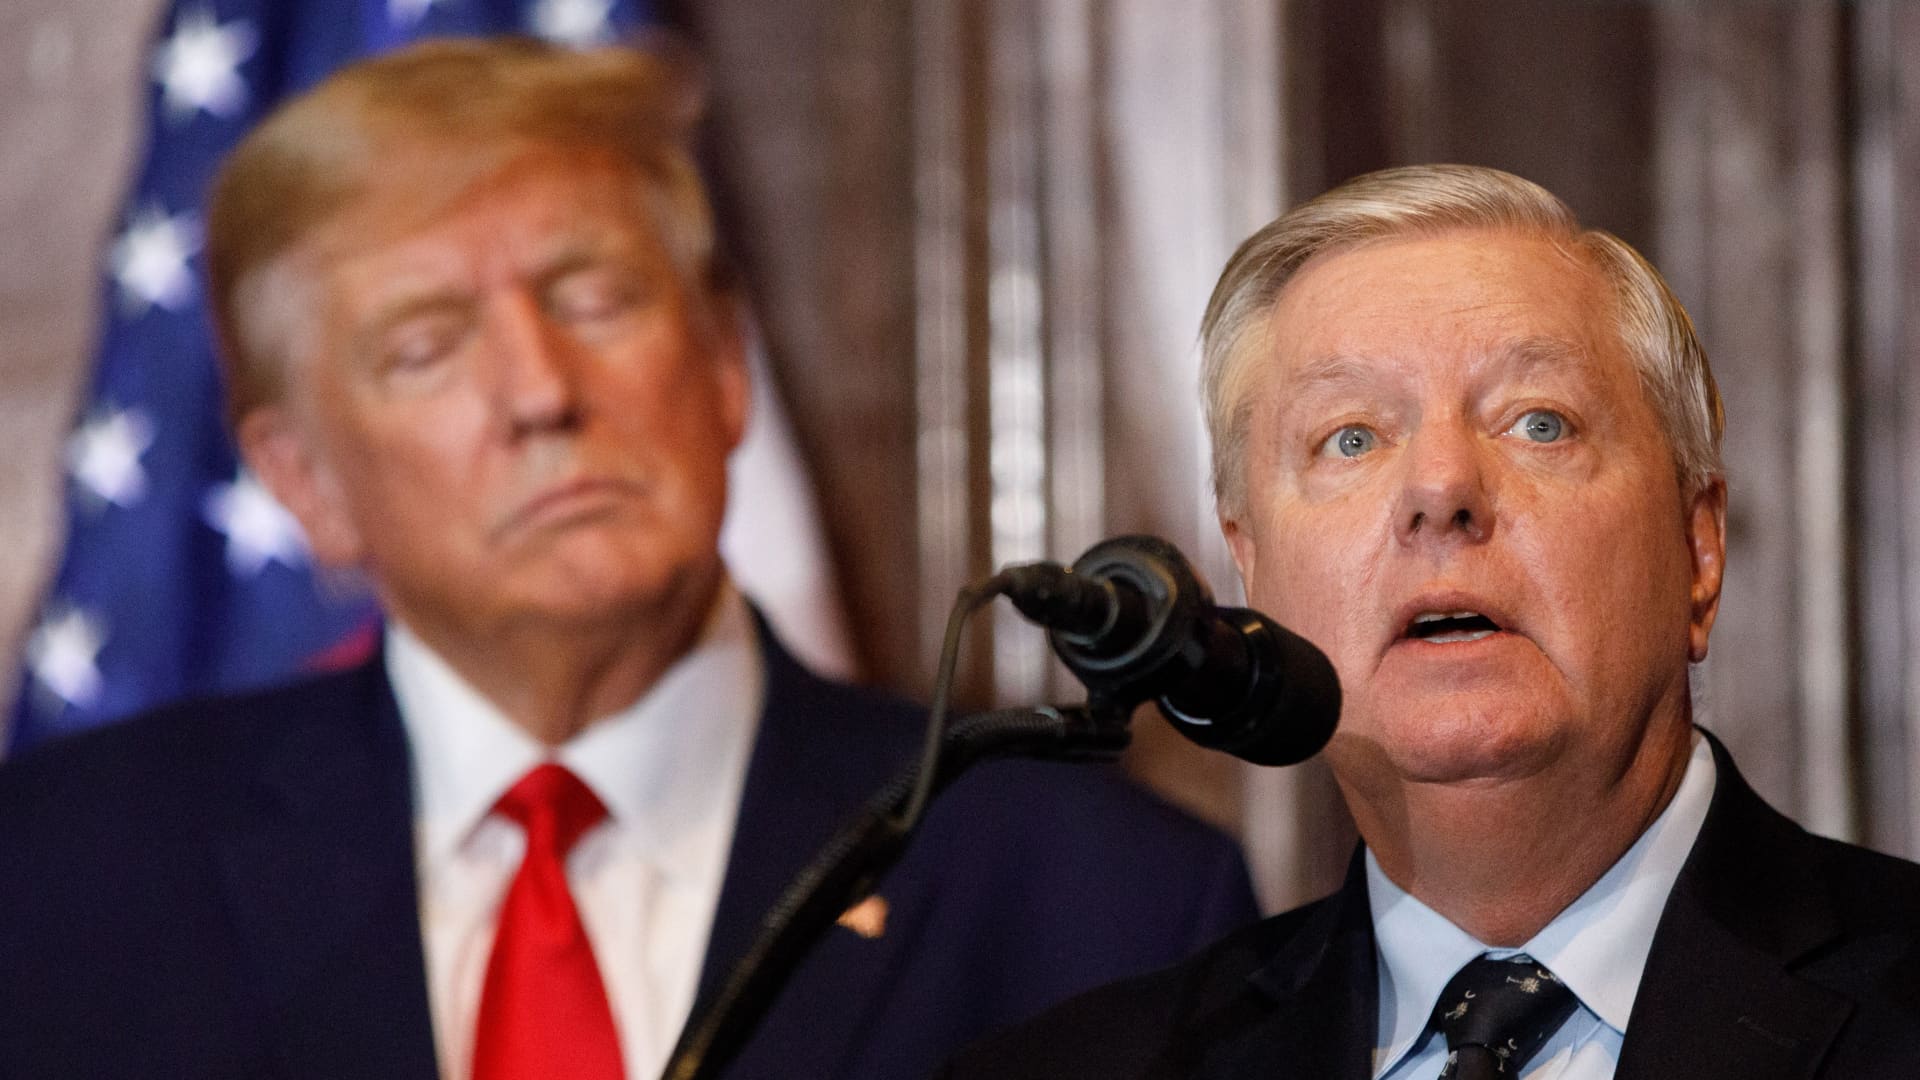 Former US President Donald Trump looks on as US Senator Lindsey Graham (R-SC) addresses the crowd during a 2024 election campaign event in Columbia, South Carolina, on January 28, 2023.